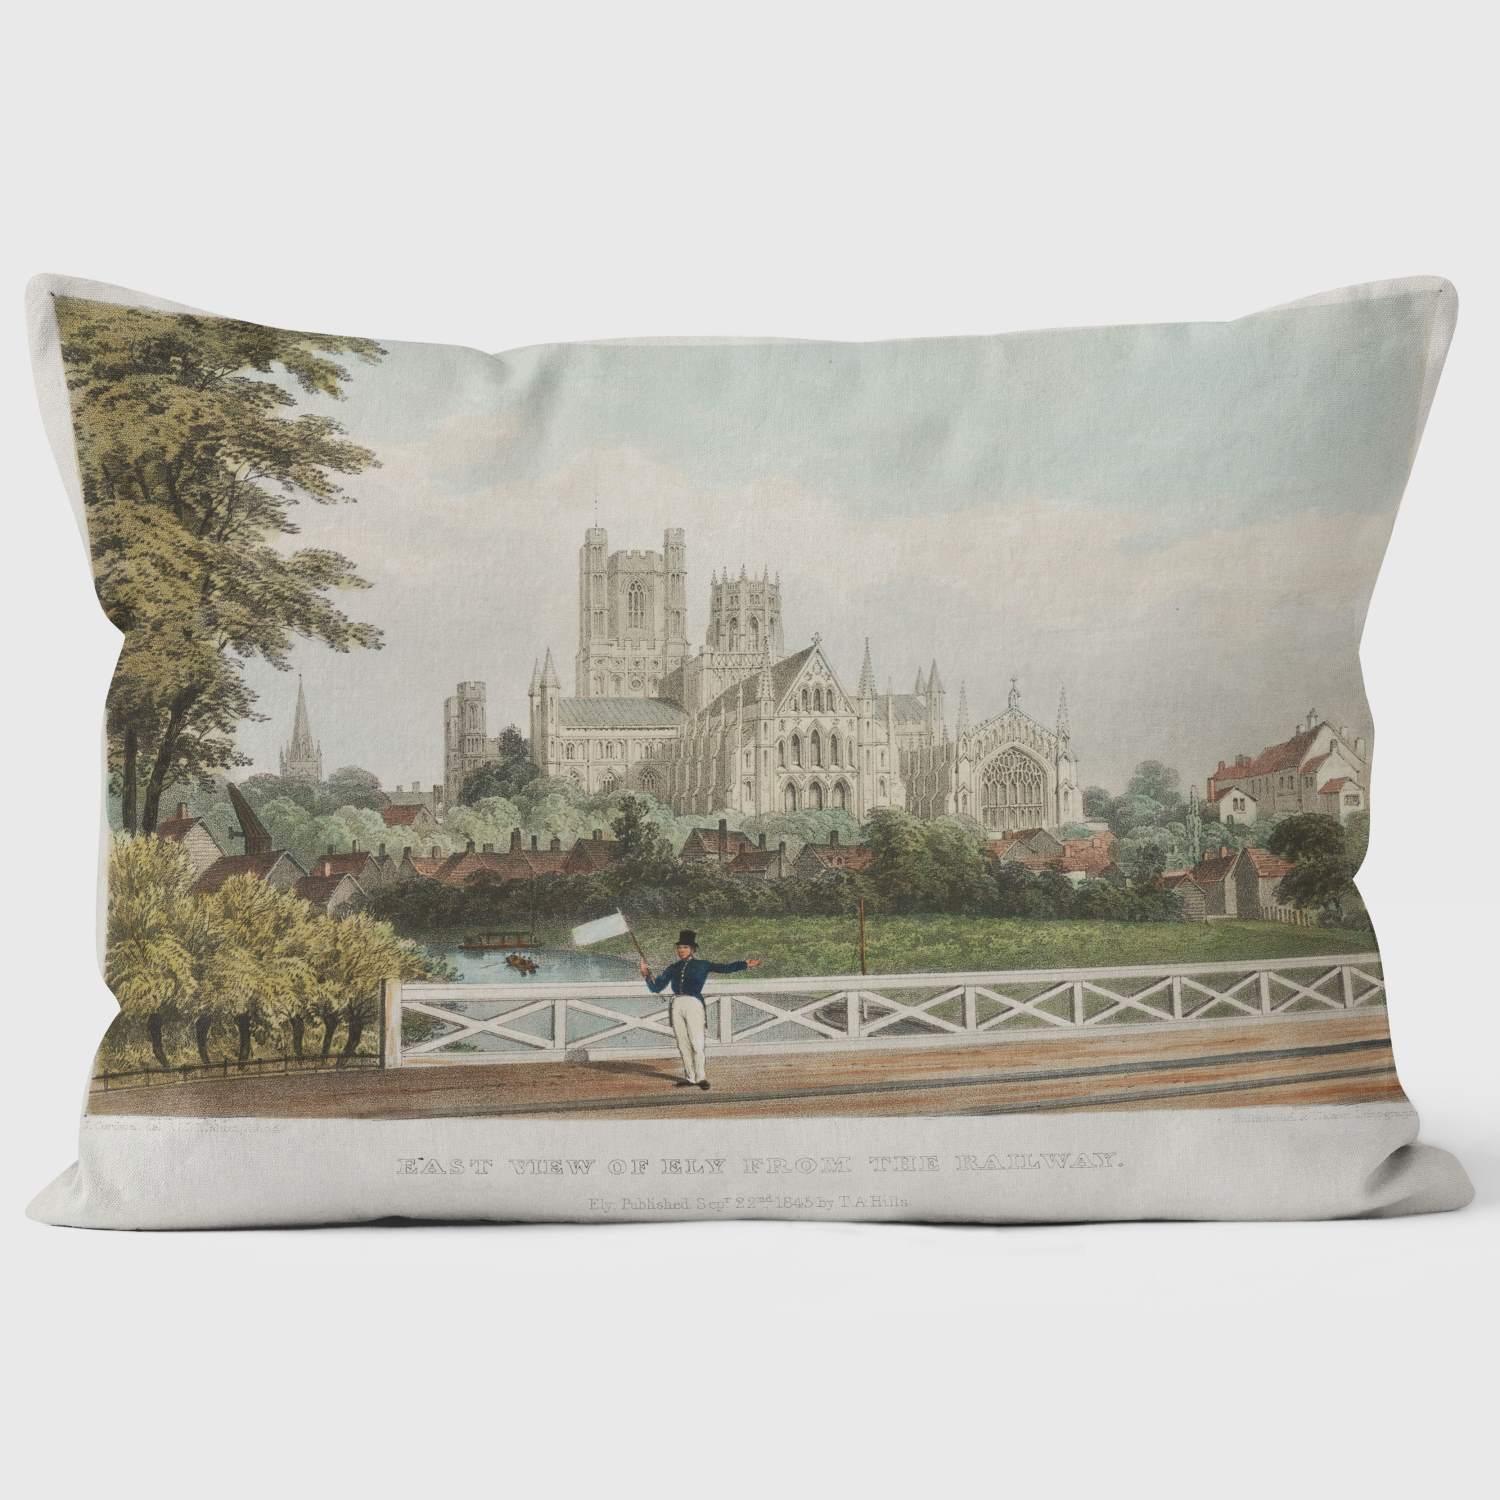 East View Ely from the Railway 1845 - National Railway Museum Cushion - Handmade Cushions UK - WeLoveCushions